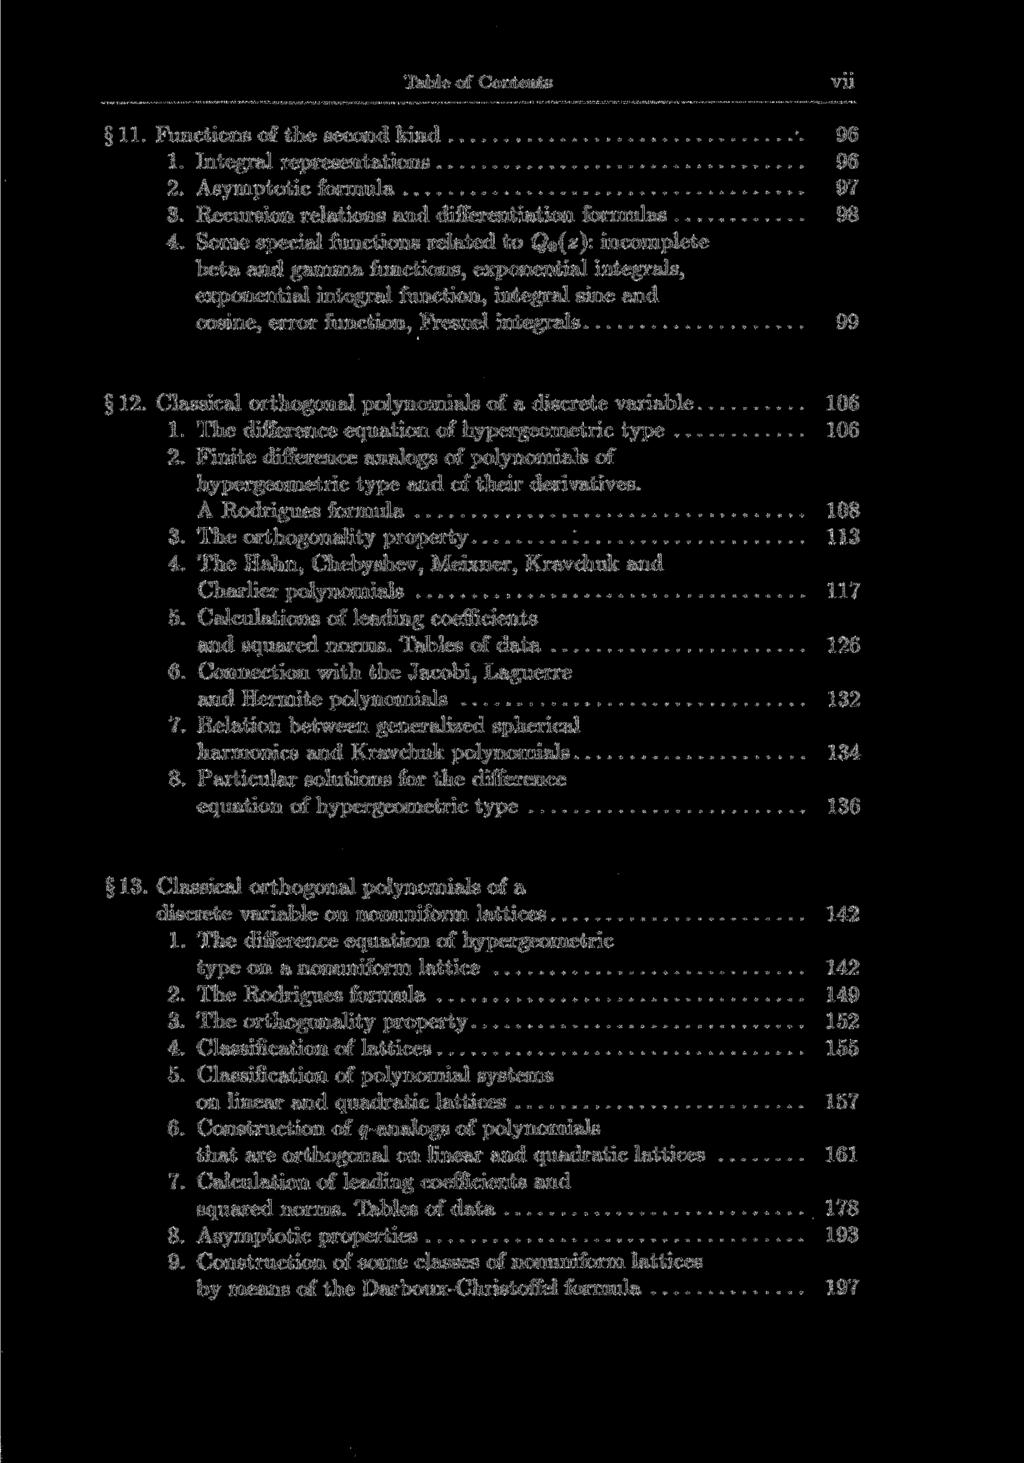 Table of Contents vii 11. Functions of the second kind '. 96 1. Integral representations 96 2. Asymptotic formula 97 3. Recursion relations and differentiation formulas 98 4.